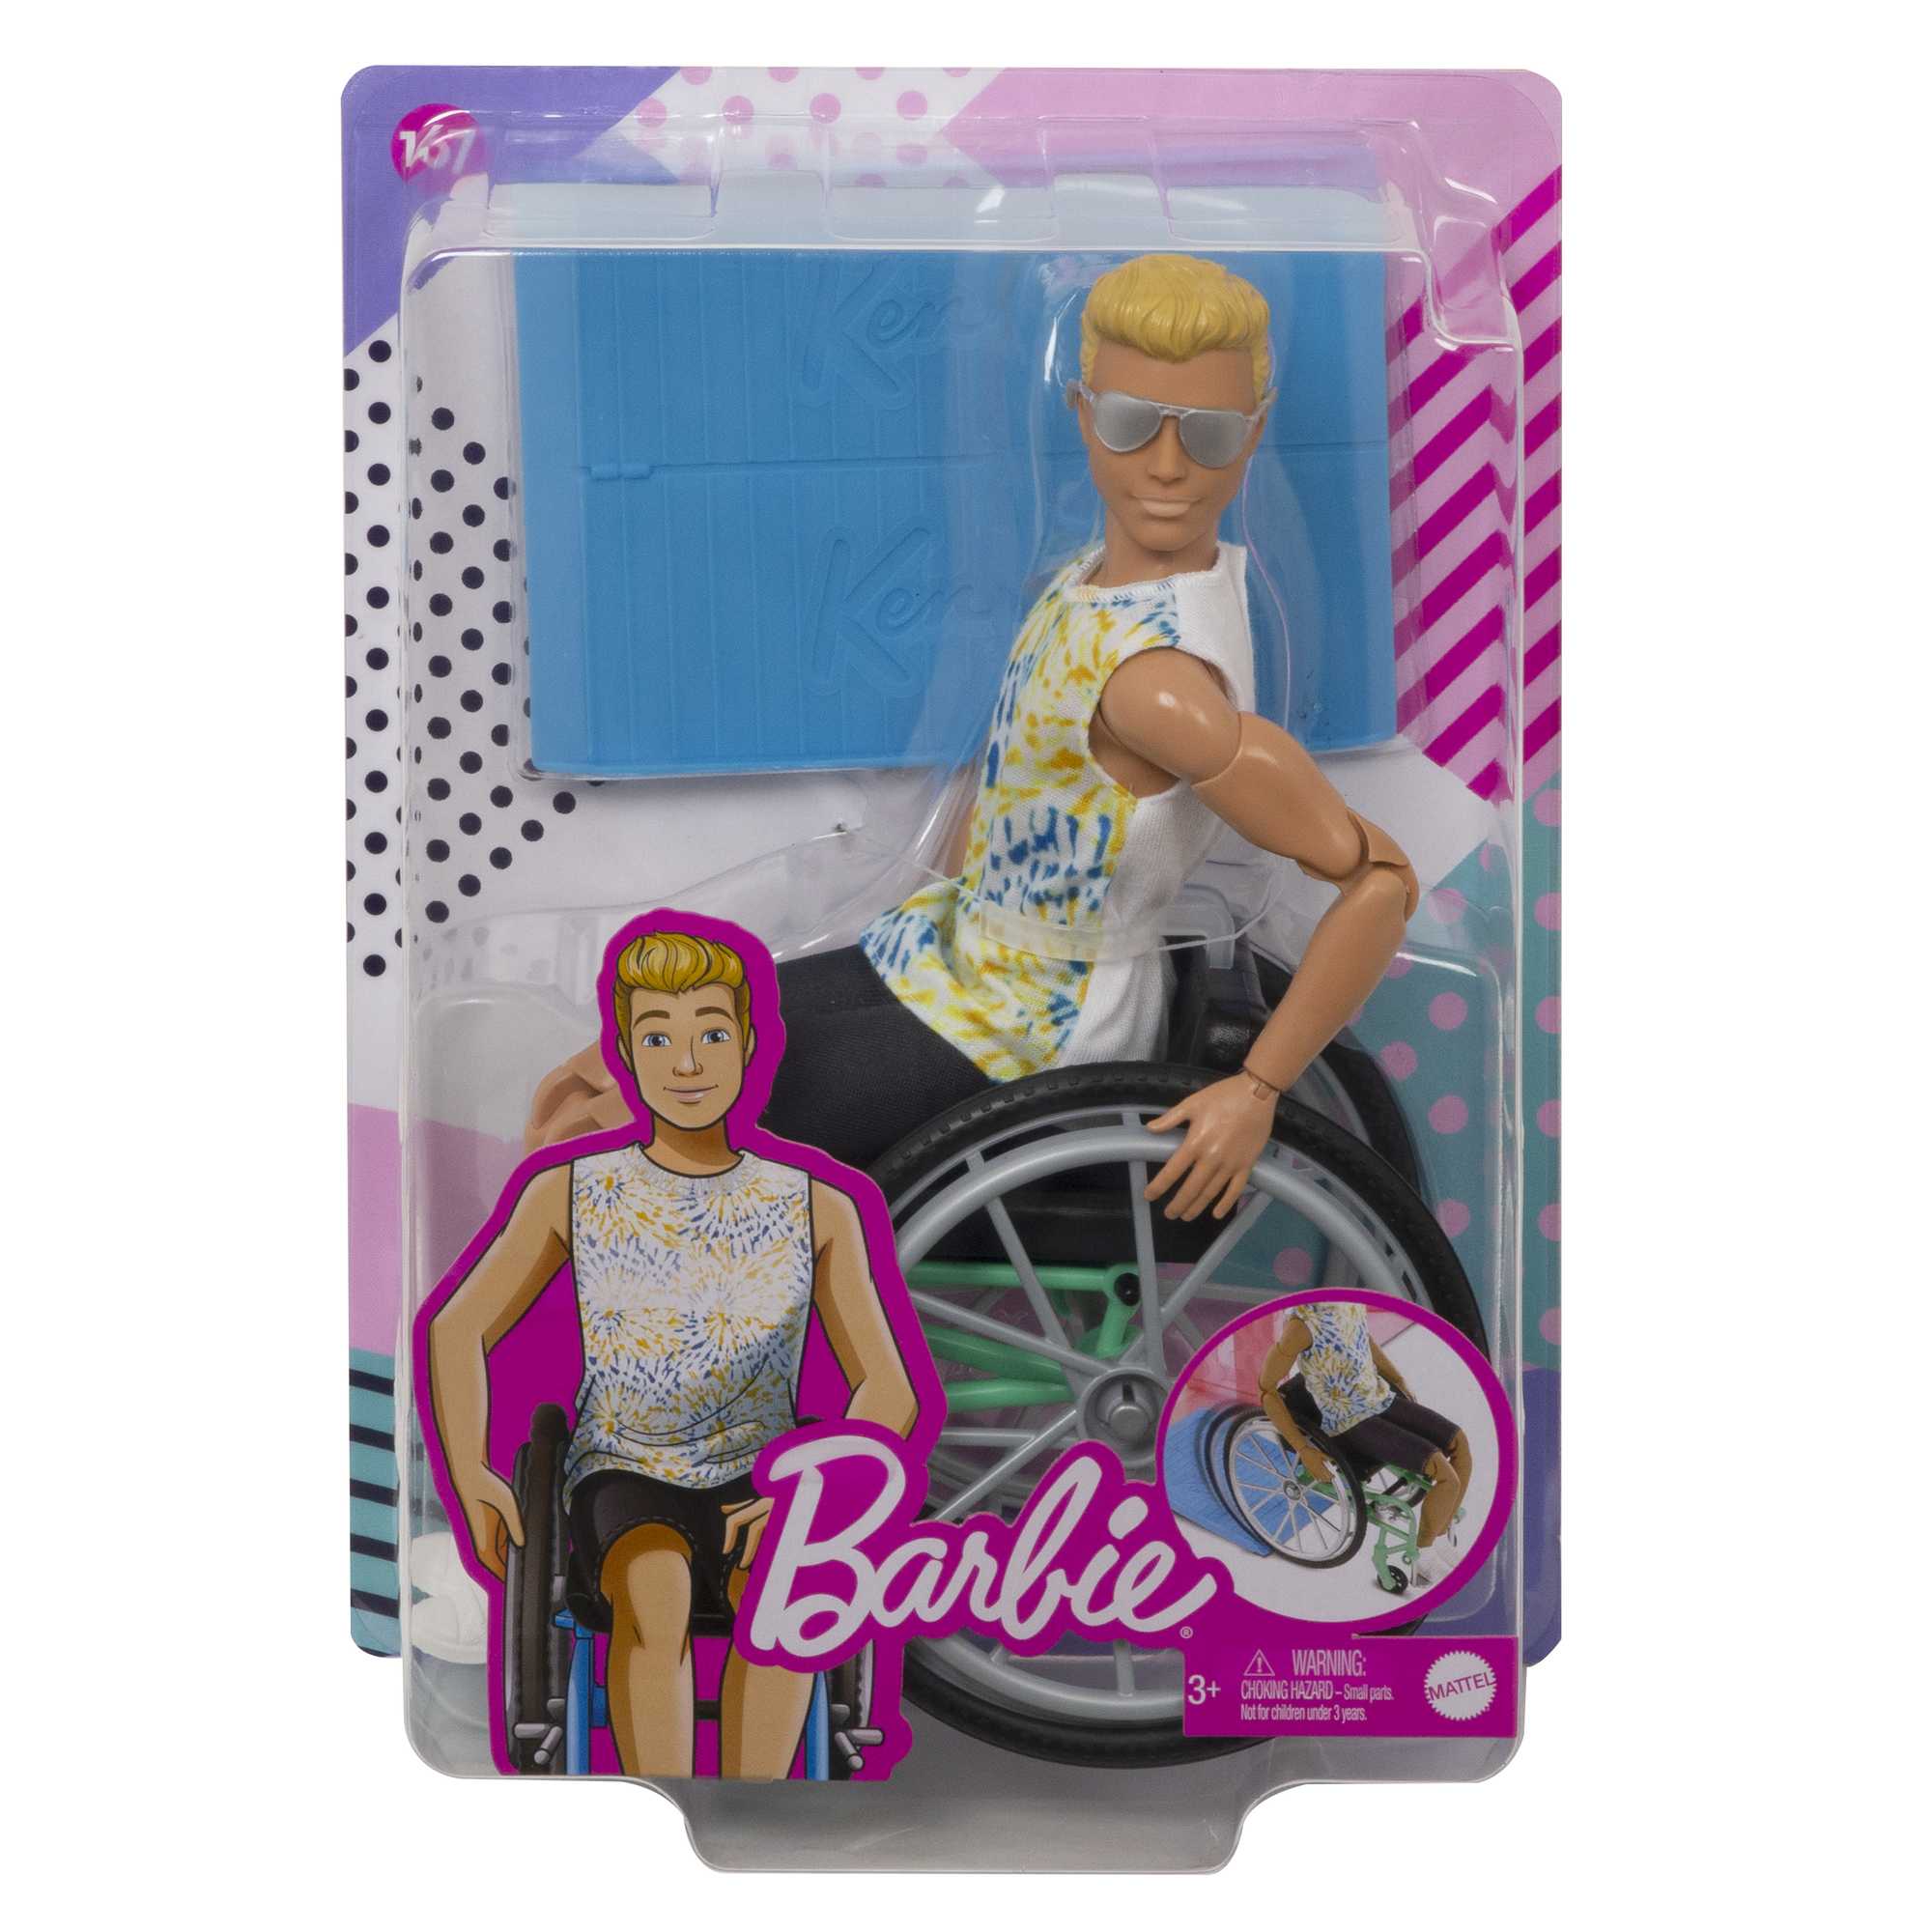 Barbie Doll And Accessory #167 | Mattel